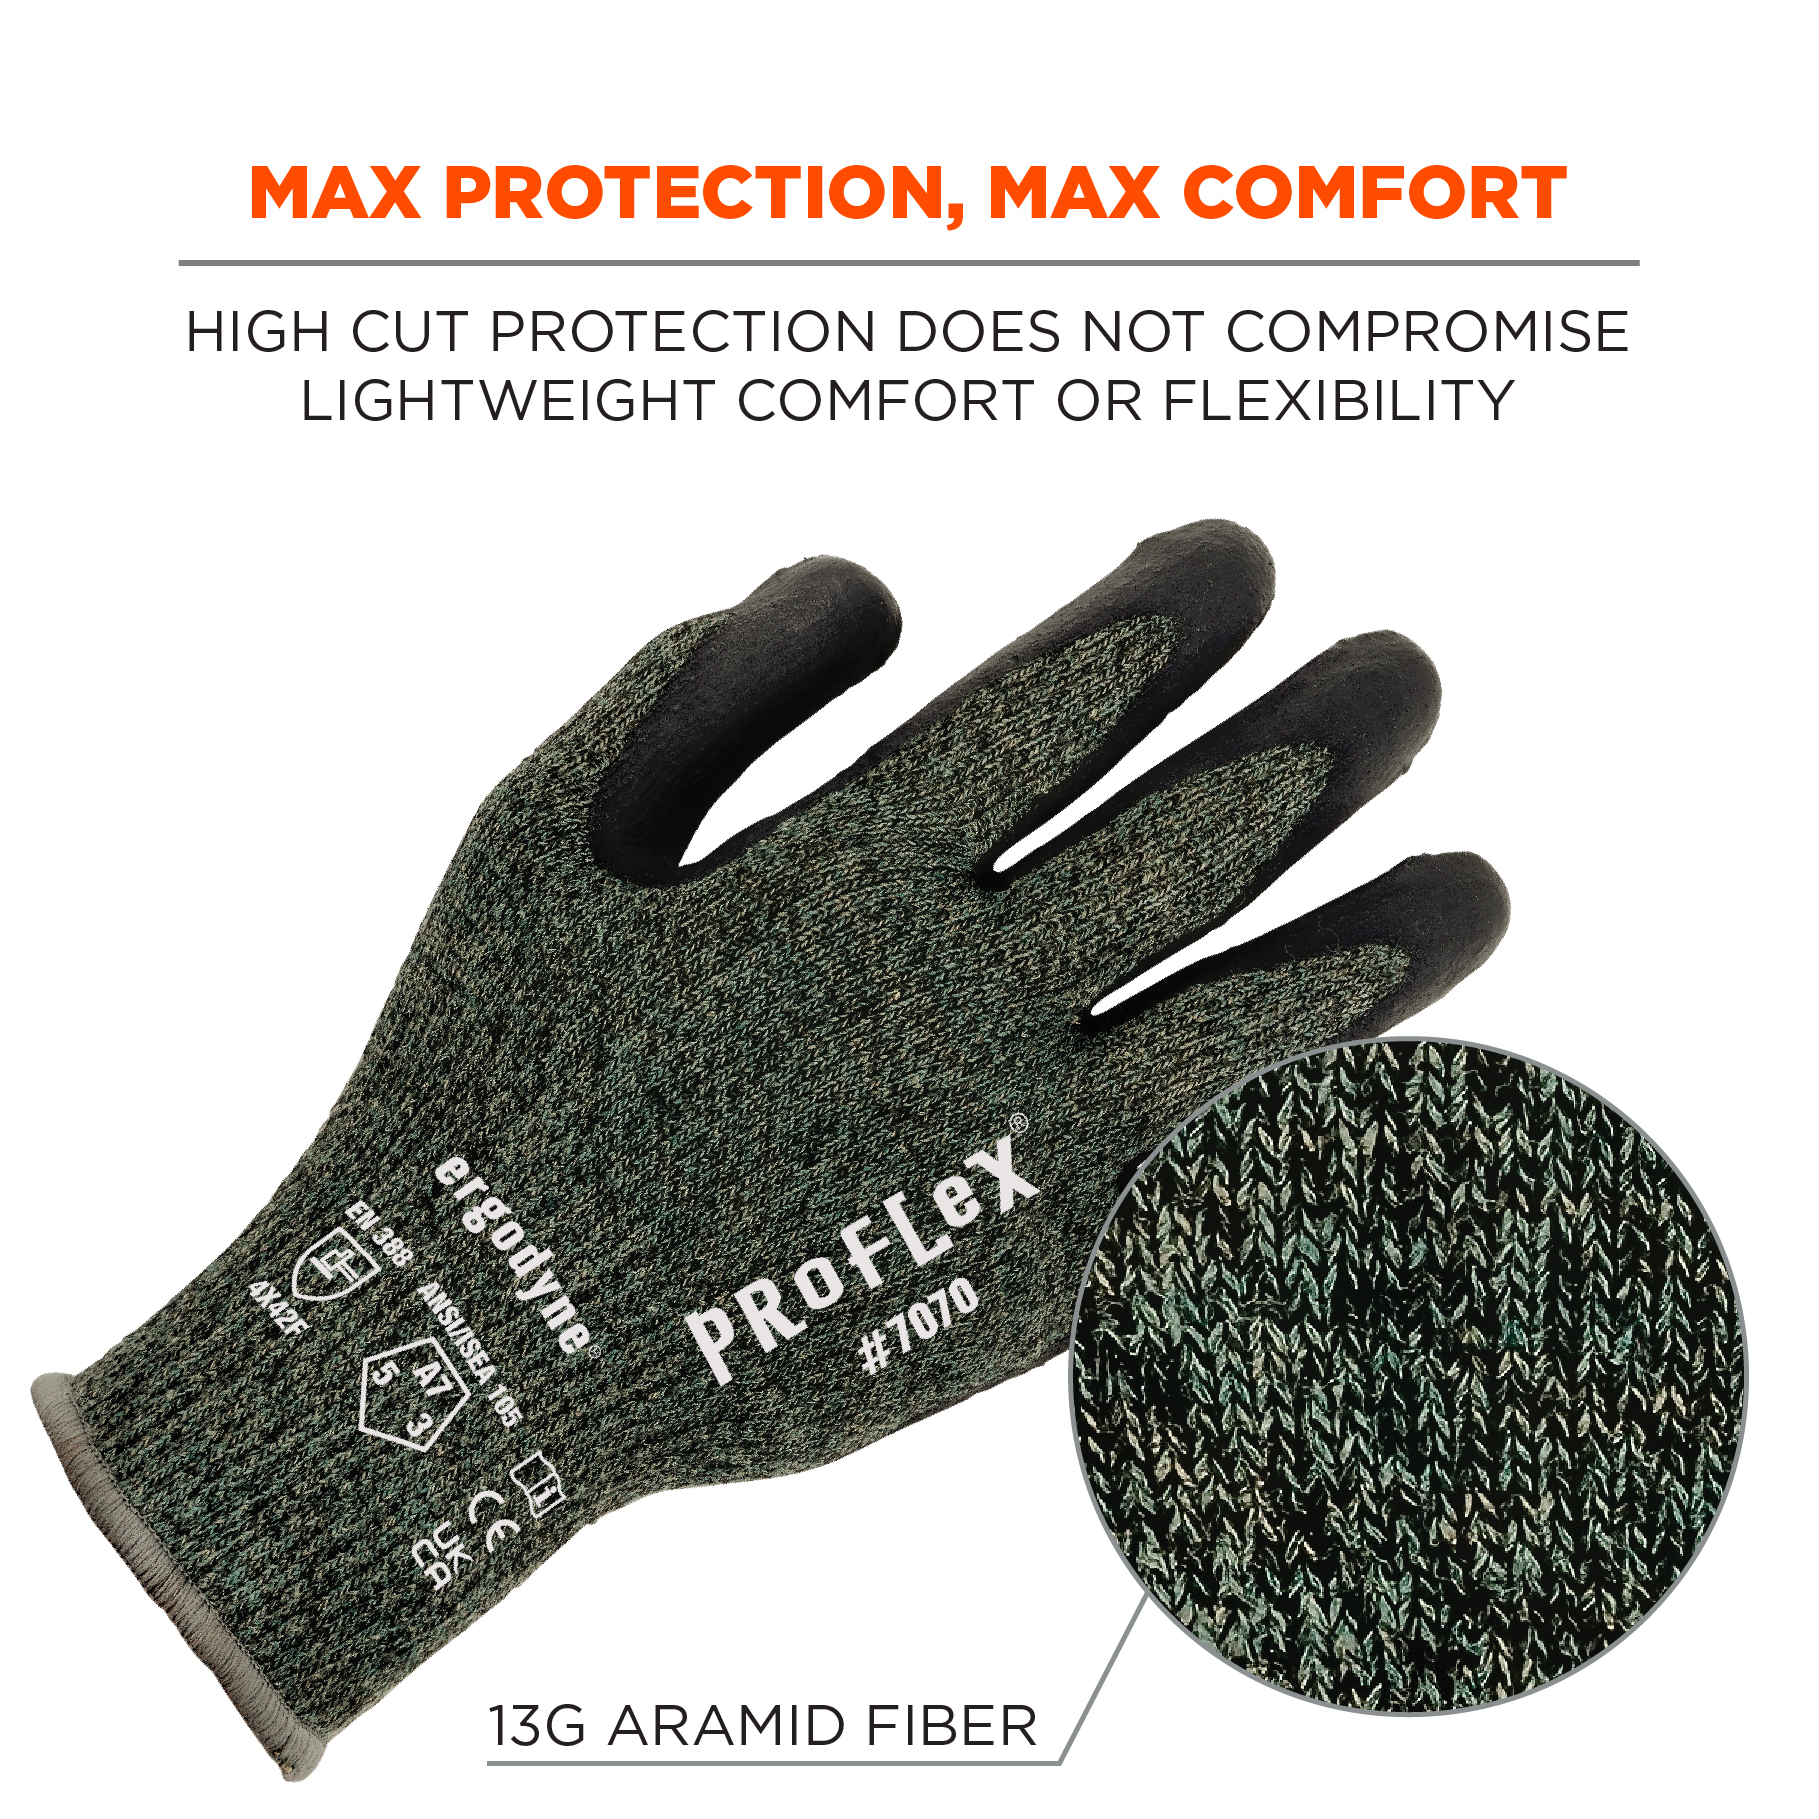 https://www.ergodyne.com/sites/default/files/product-images/18042-7070-ansi-a7-nitrile-coated-cr-gloves-green-max-protection-max-comfort_0.jpg